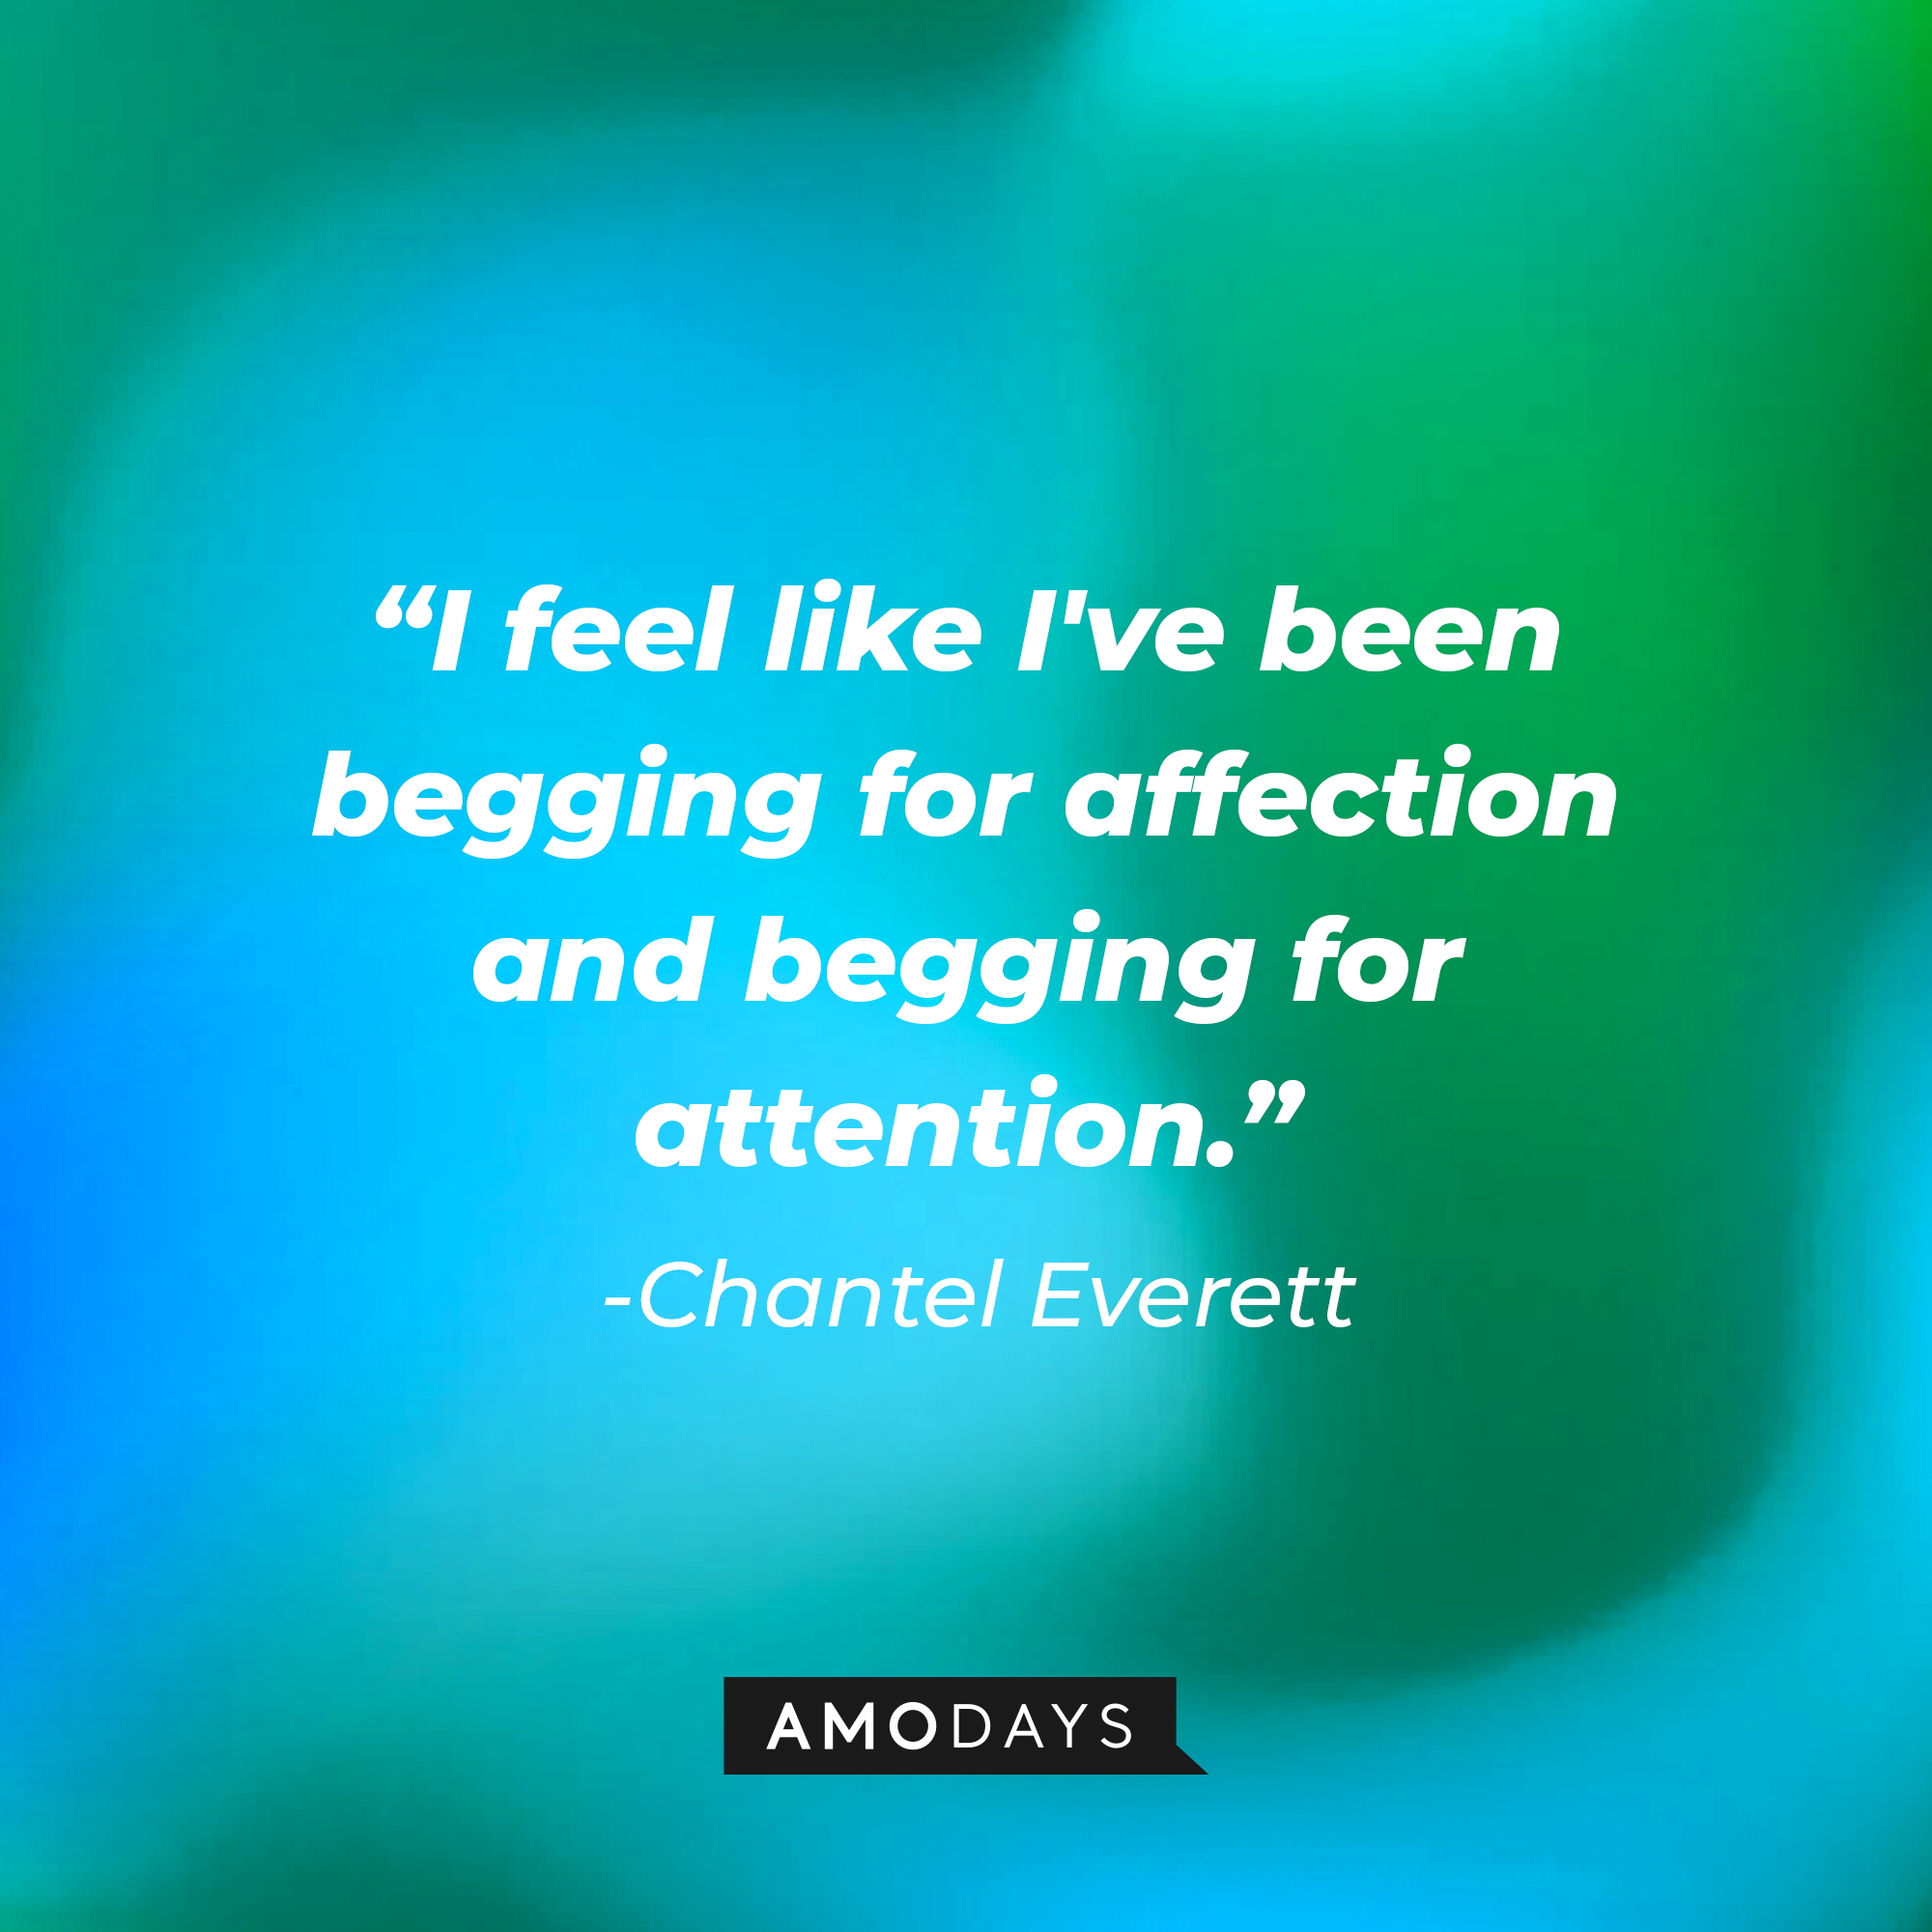 Chantel Everett's quote: I feel like I've been begging for affection and begging for attention." | Source: Amodays